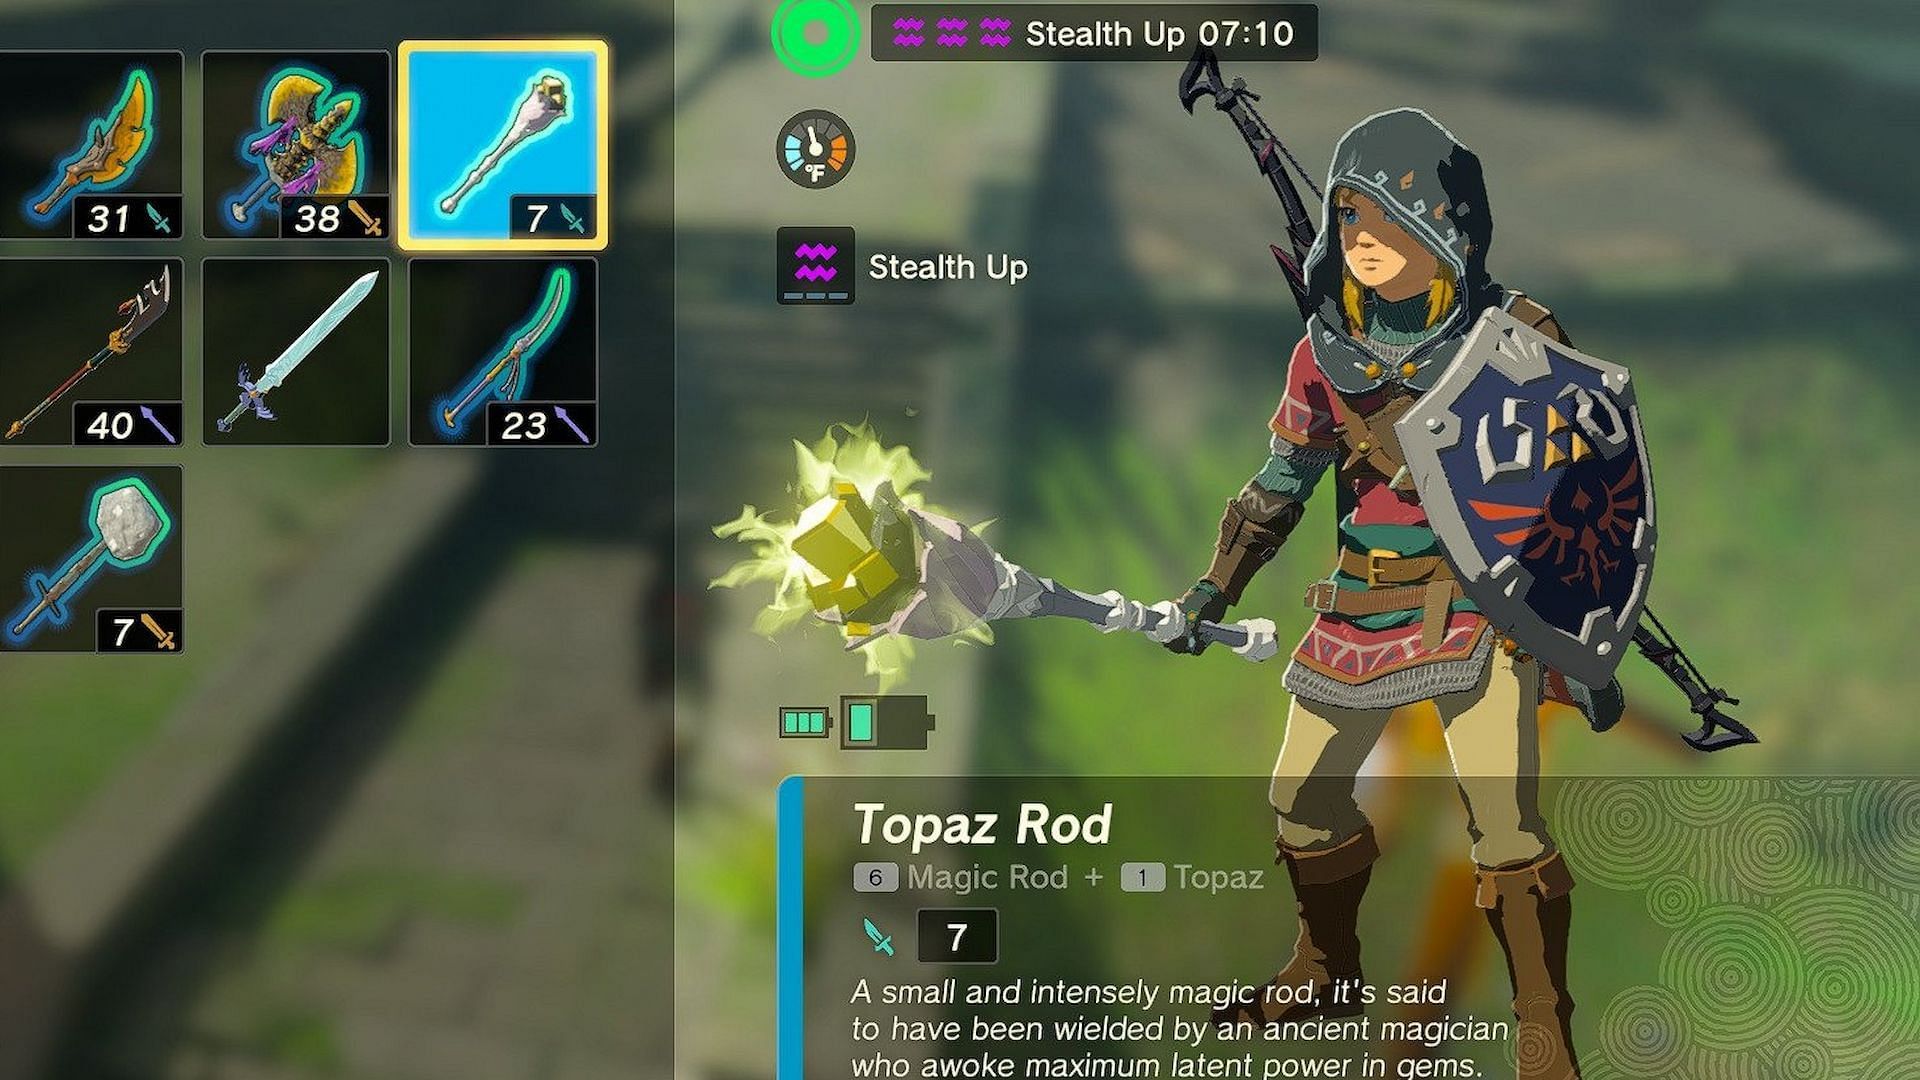 You can fuse Topaz with Magic Rod (Image via The Legend of Zelda Tears of the Kingdom)